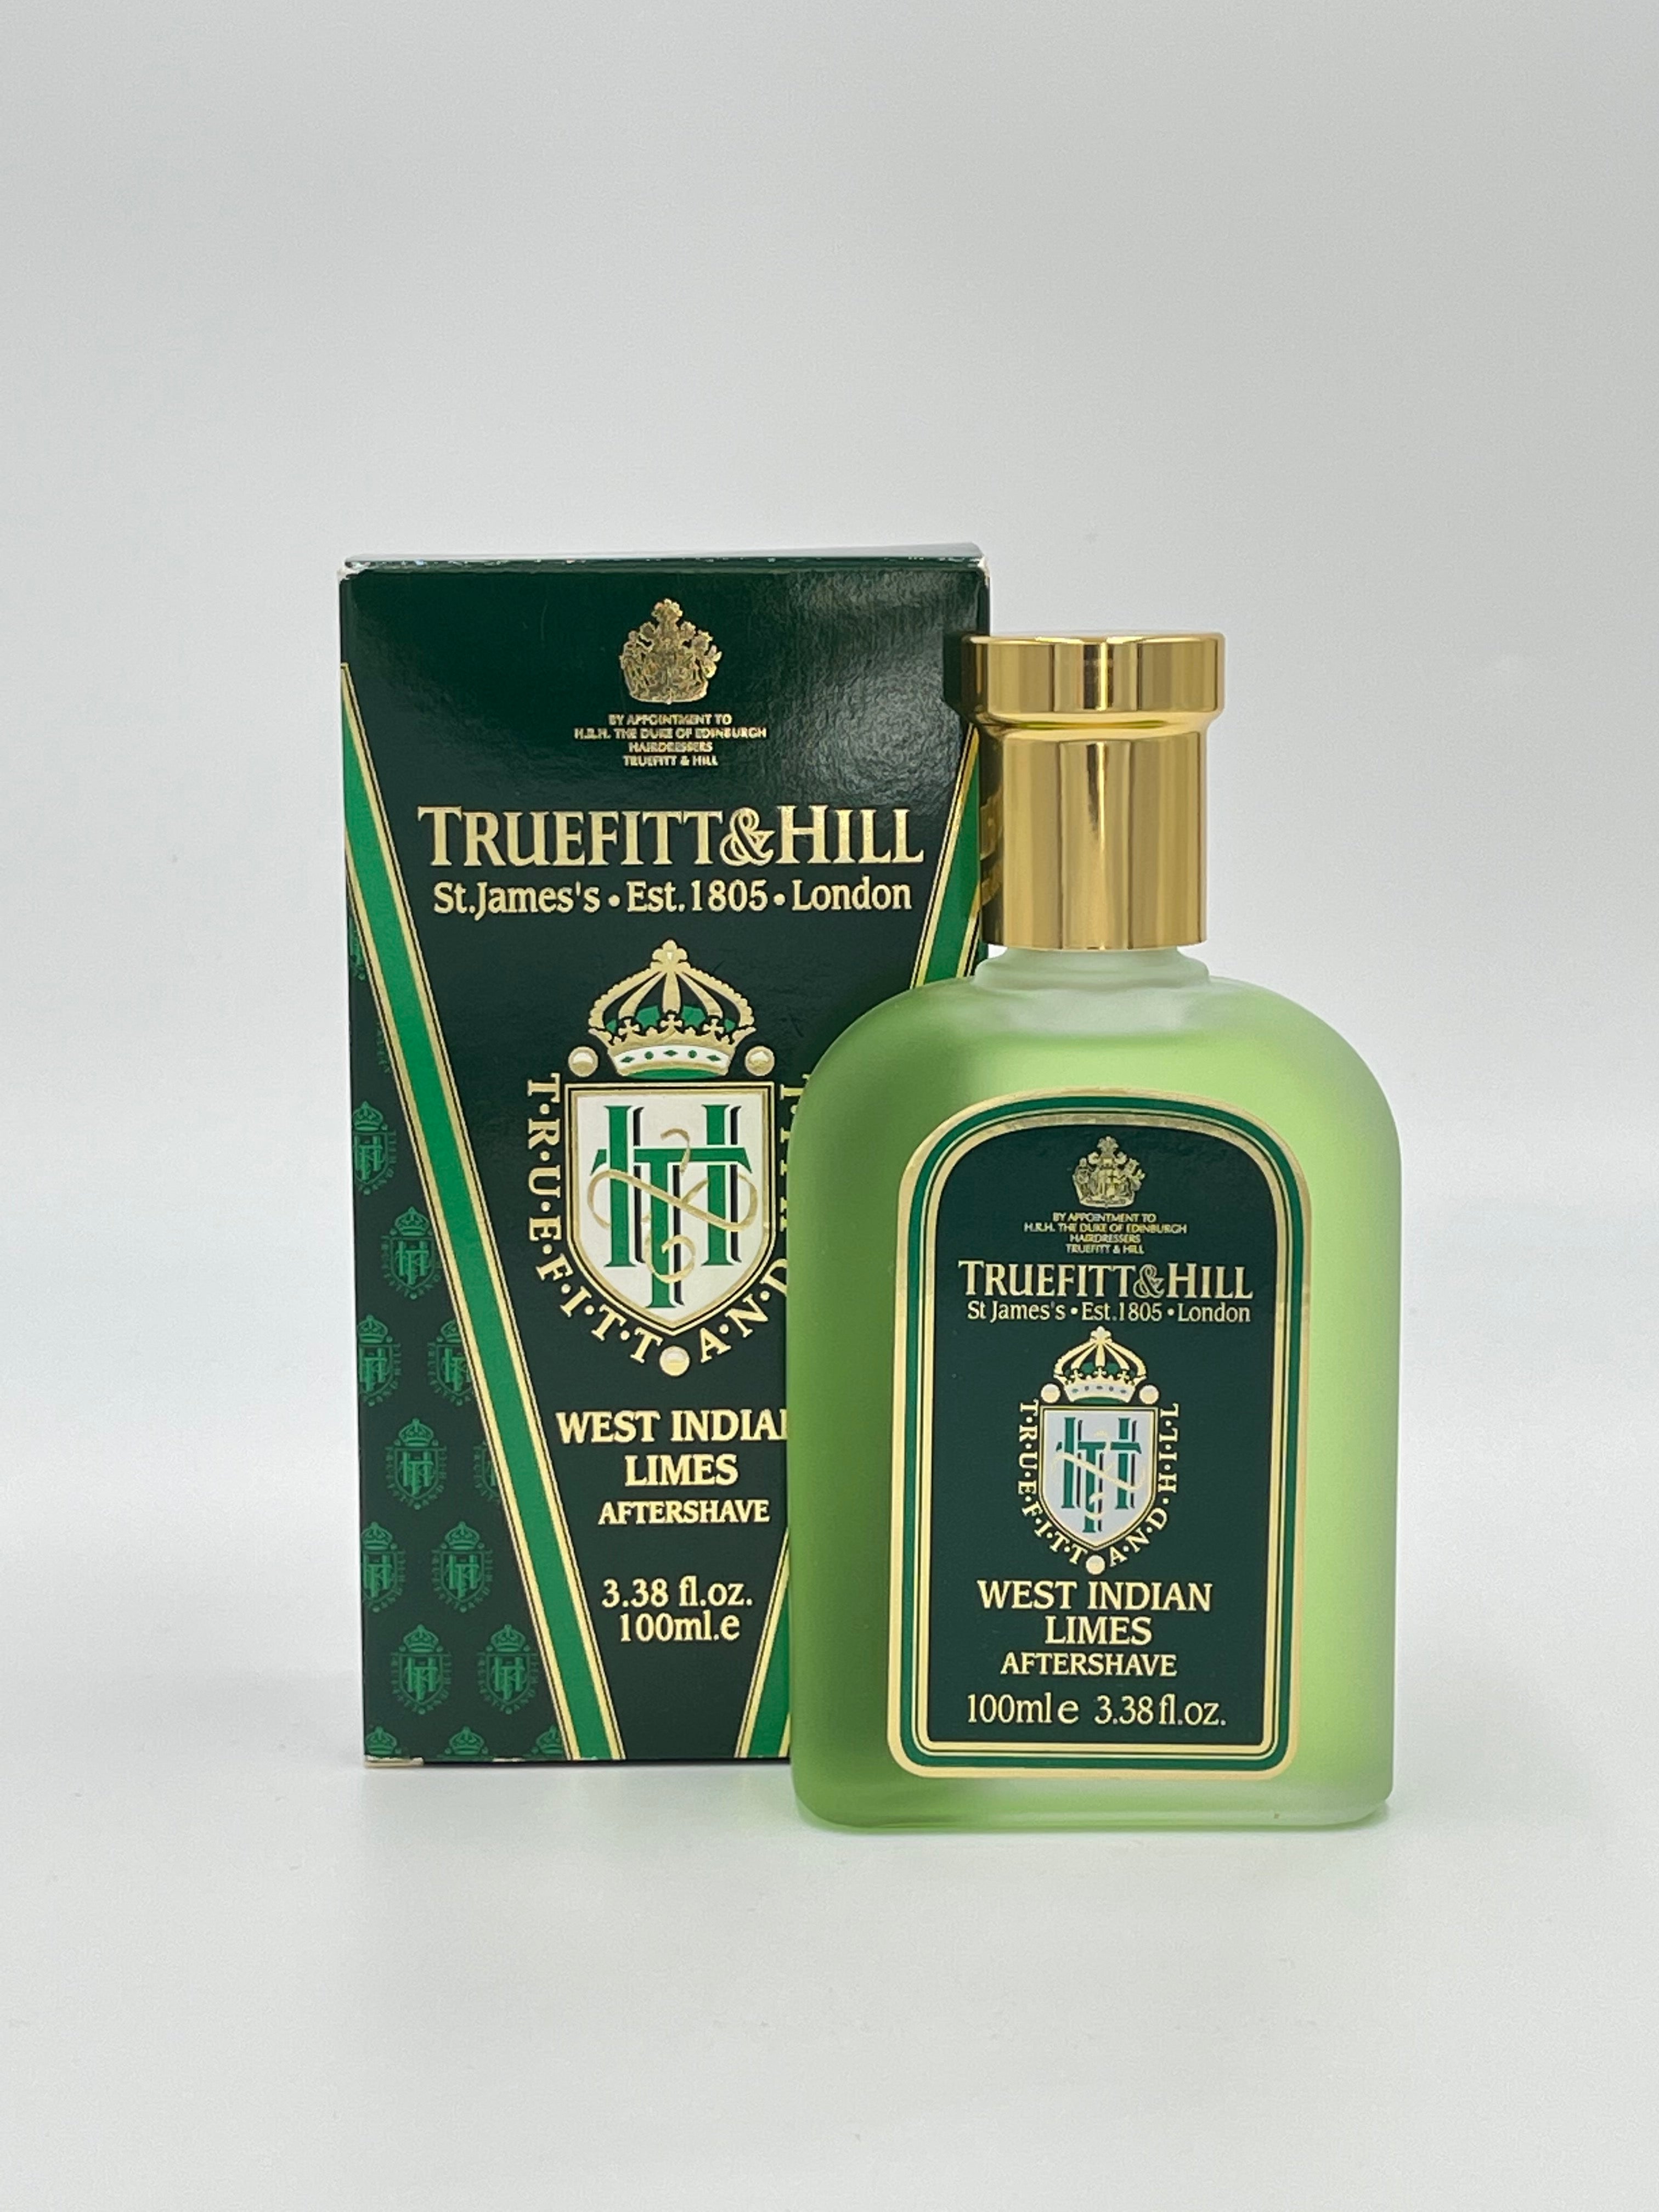 Truefitt&hill West Indian Limes Aftershave 100ml